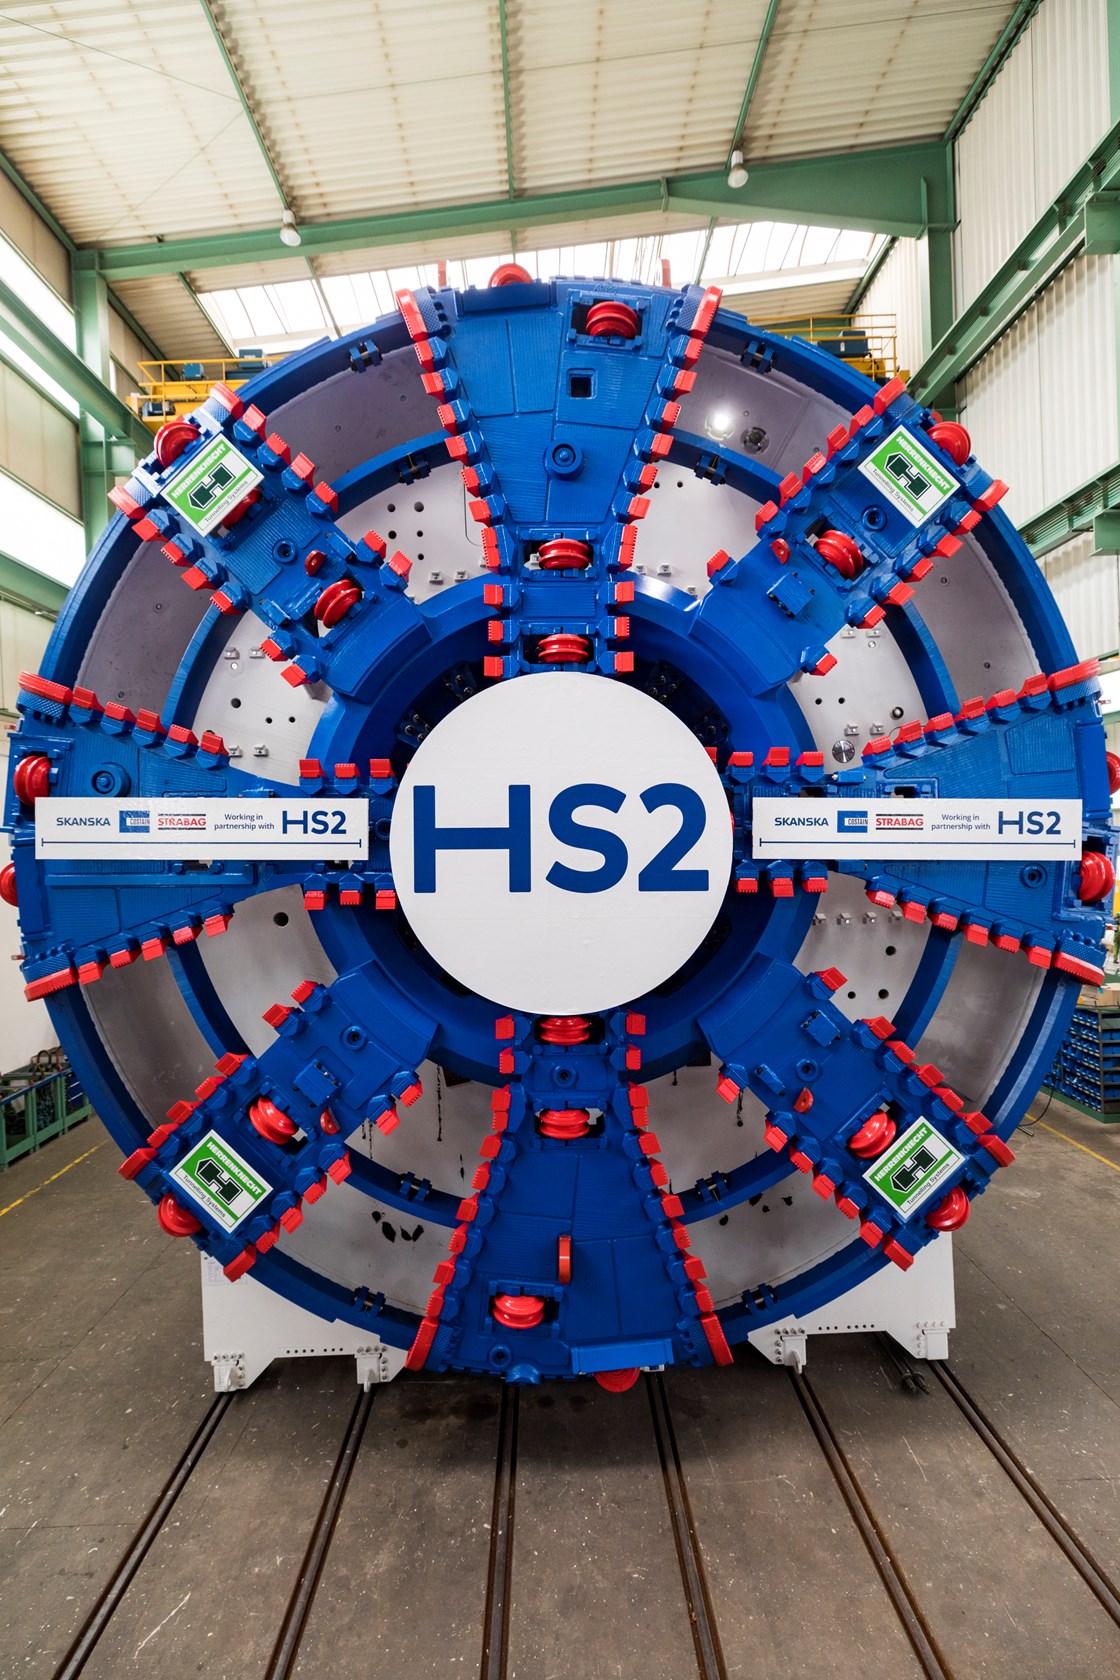 First two London Tunnels TBMs arrive in West Ruislip-6: One of the first two London Tunnels TBMs during Factory Acceptance Test at Herrenknecht, Germany

Tags: Tunnelling, Engineering, TBMs, Tunnel Boring Machines, London, West Ruislip, SCS JV